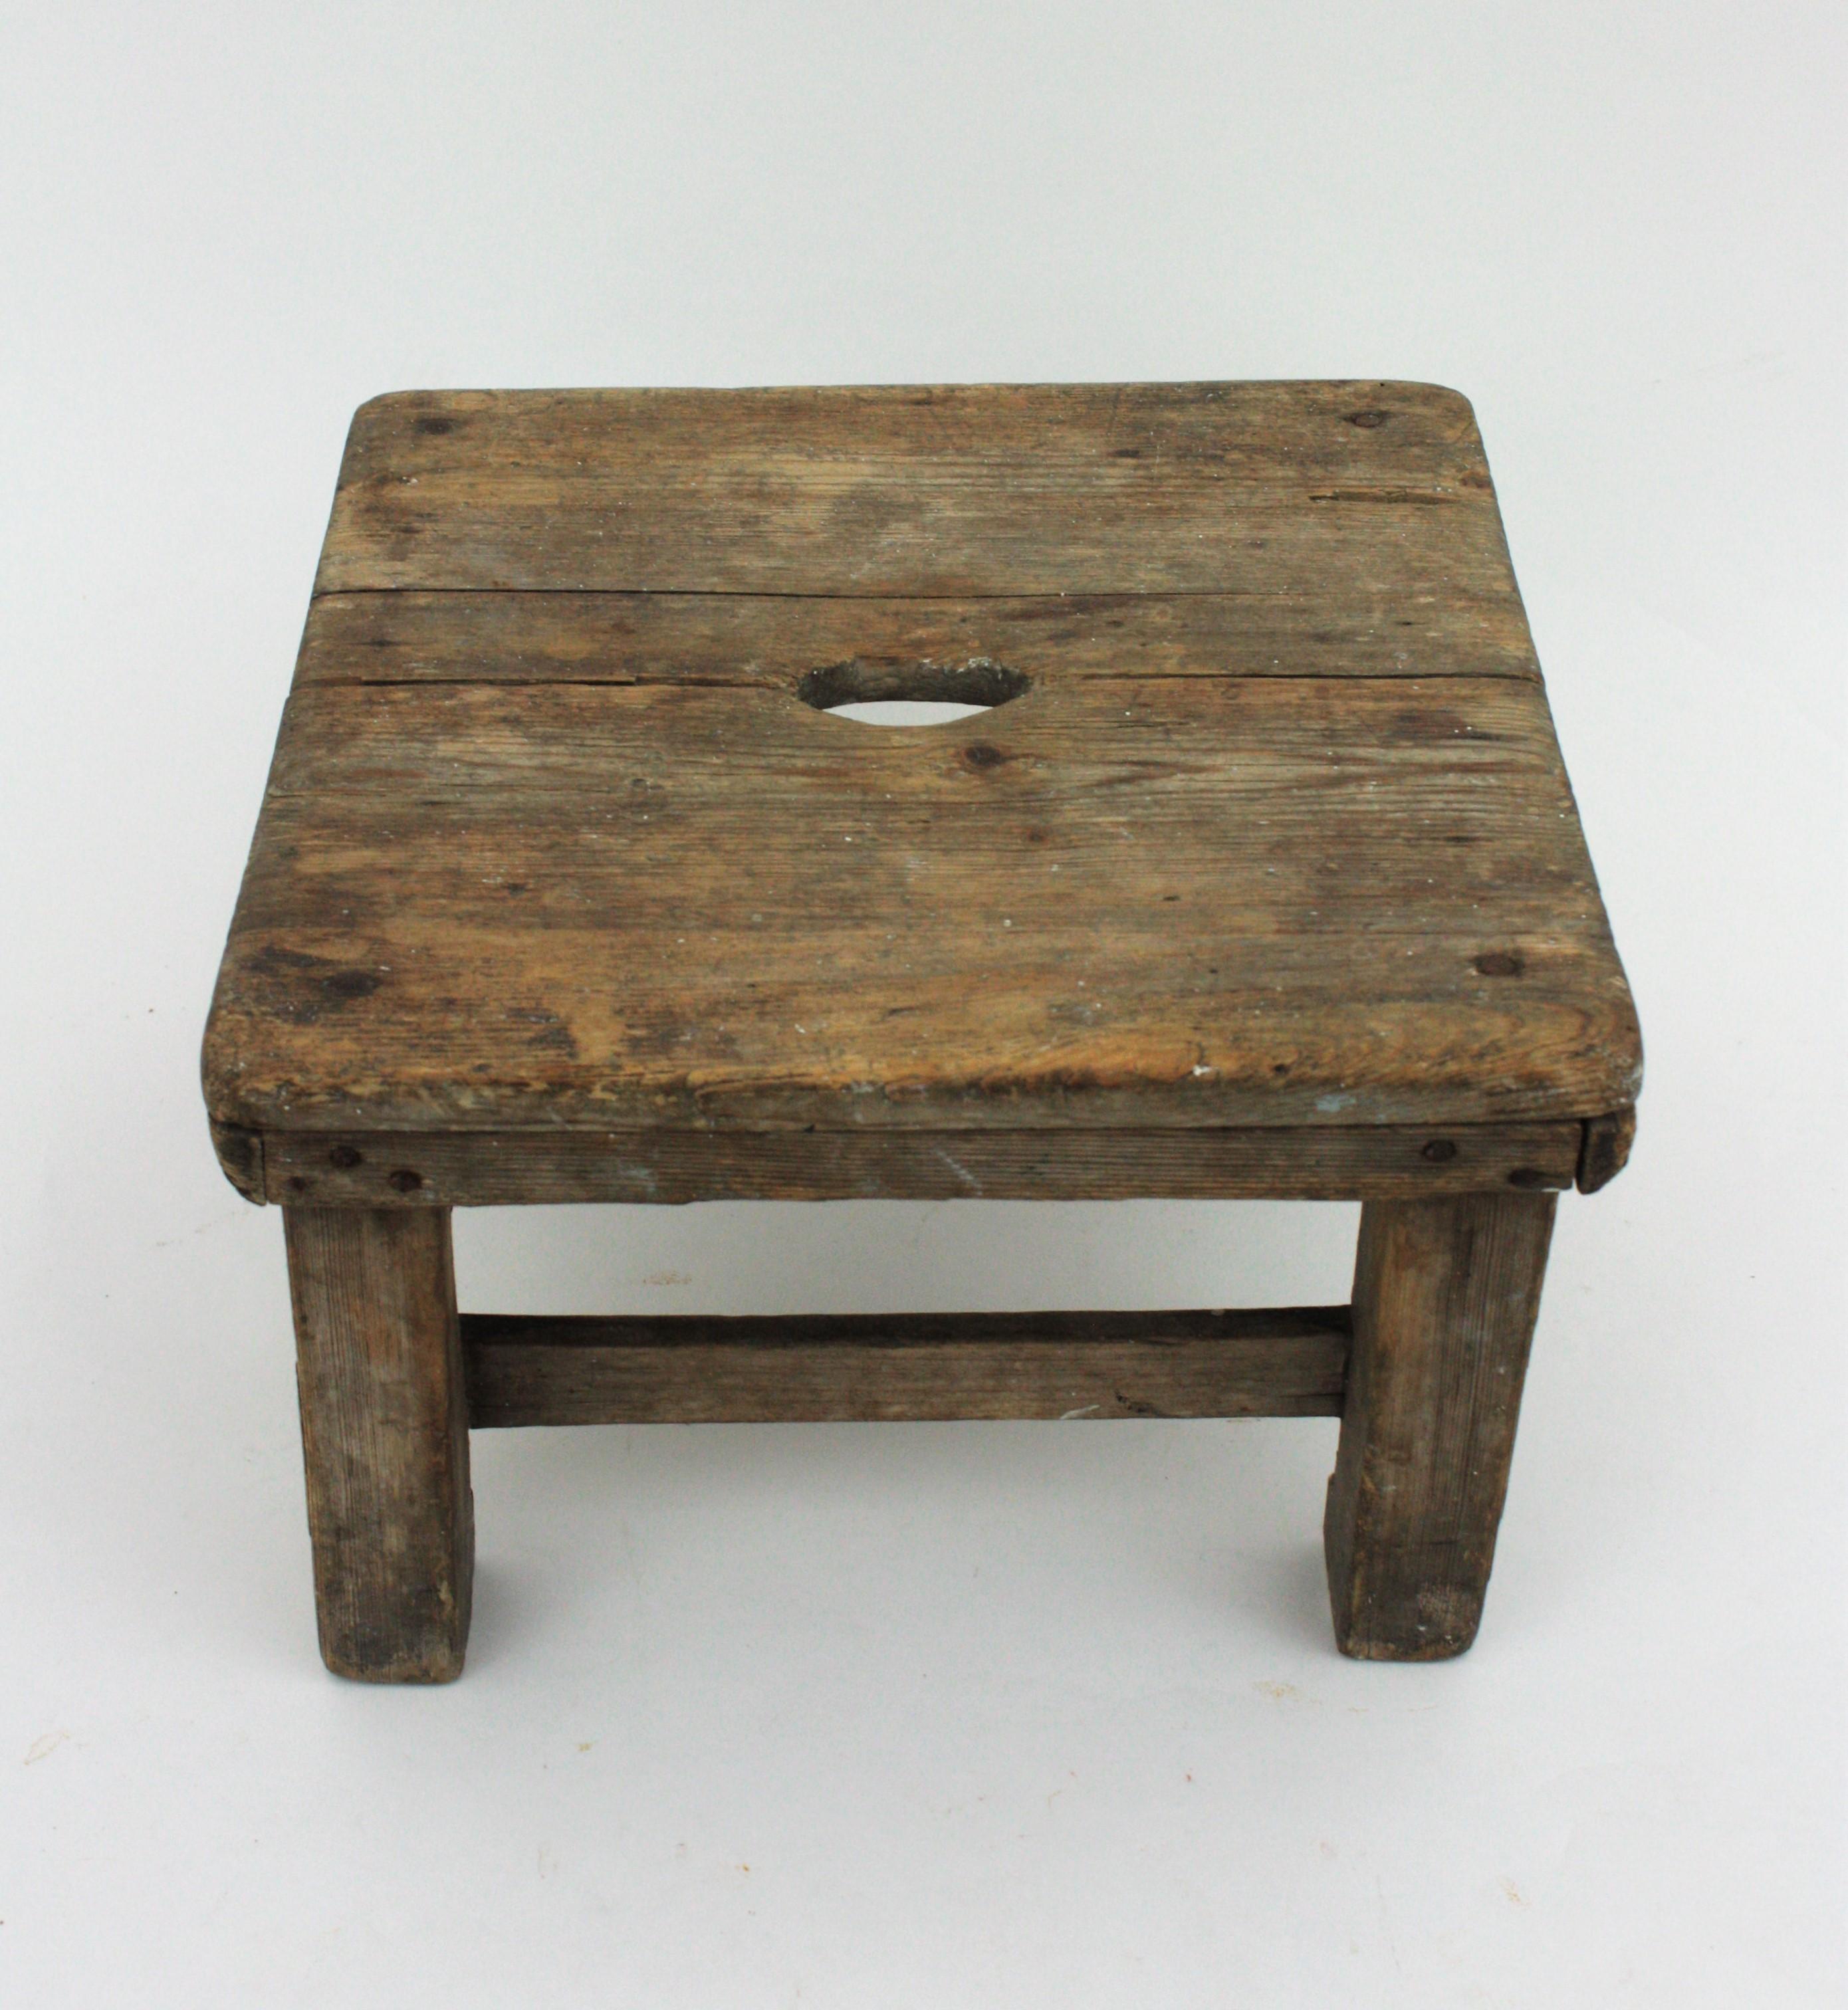 20th Century Rustic Workshop Wooden Pedestal Stand or Stool For Sale